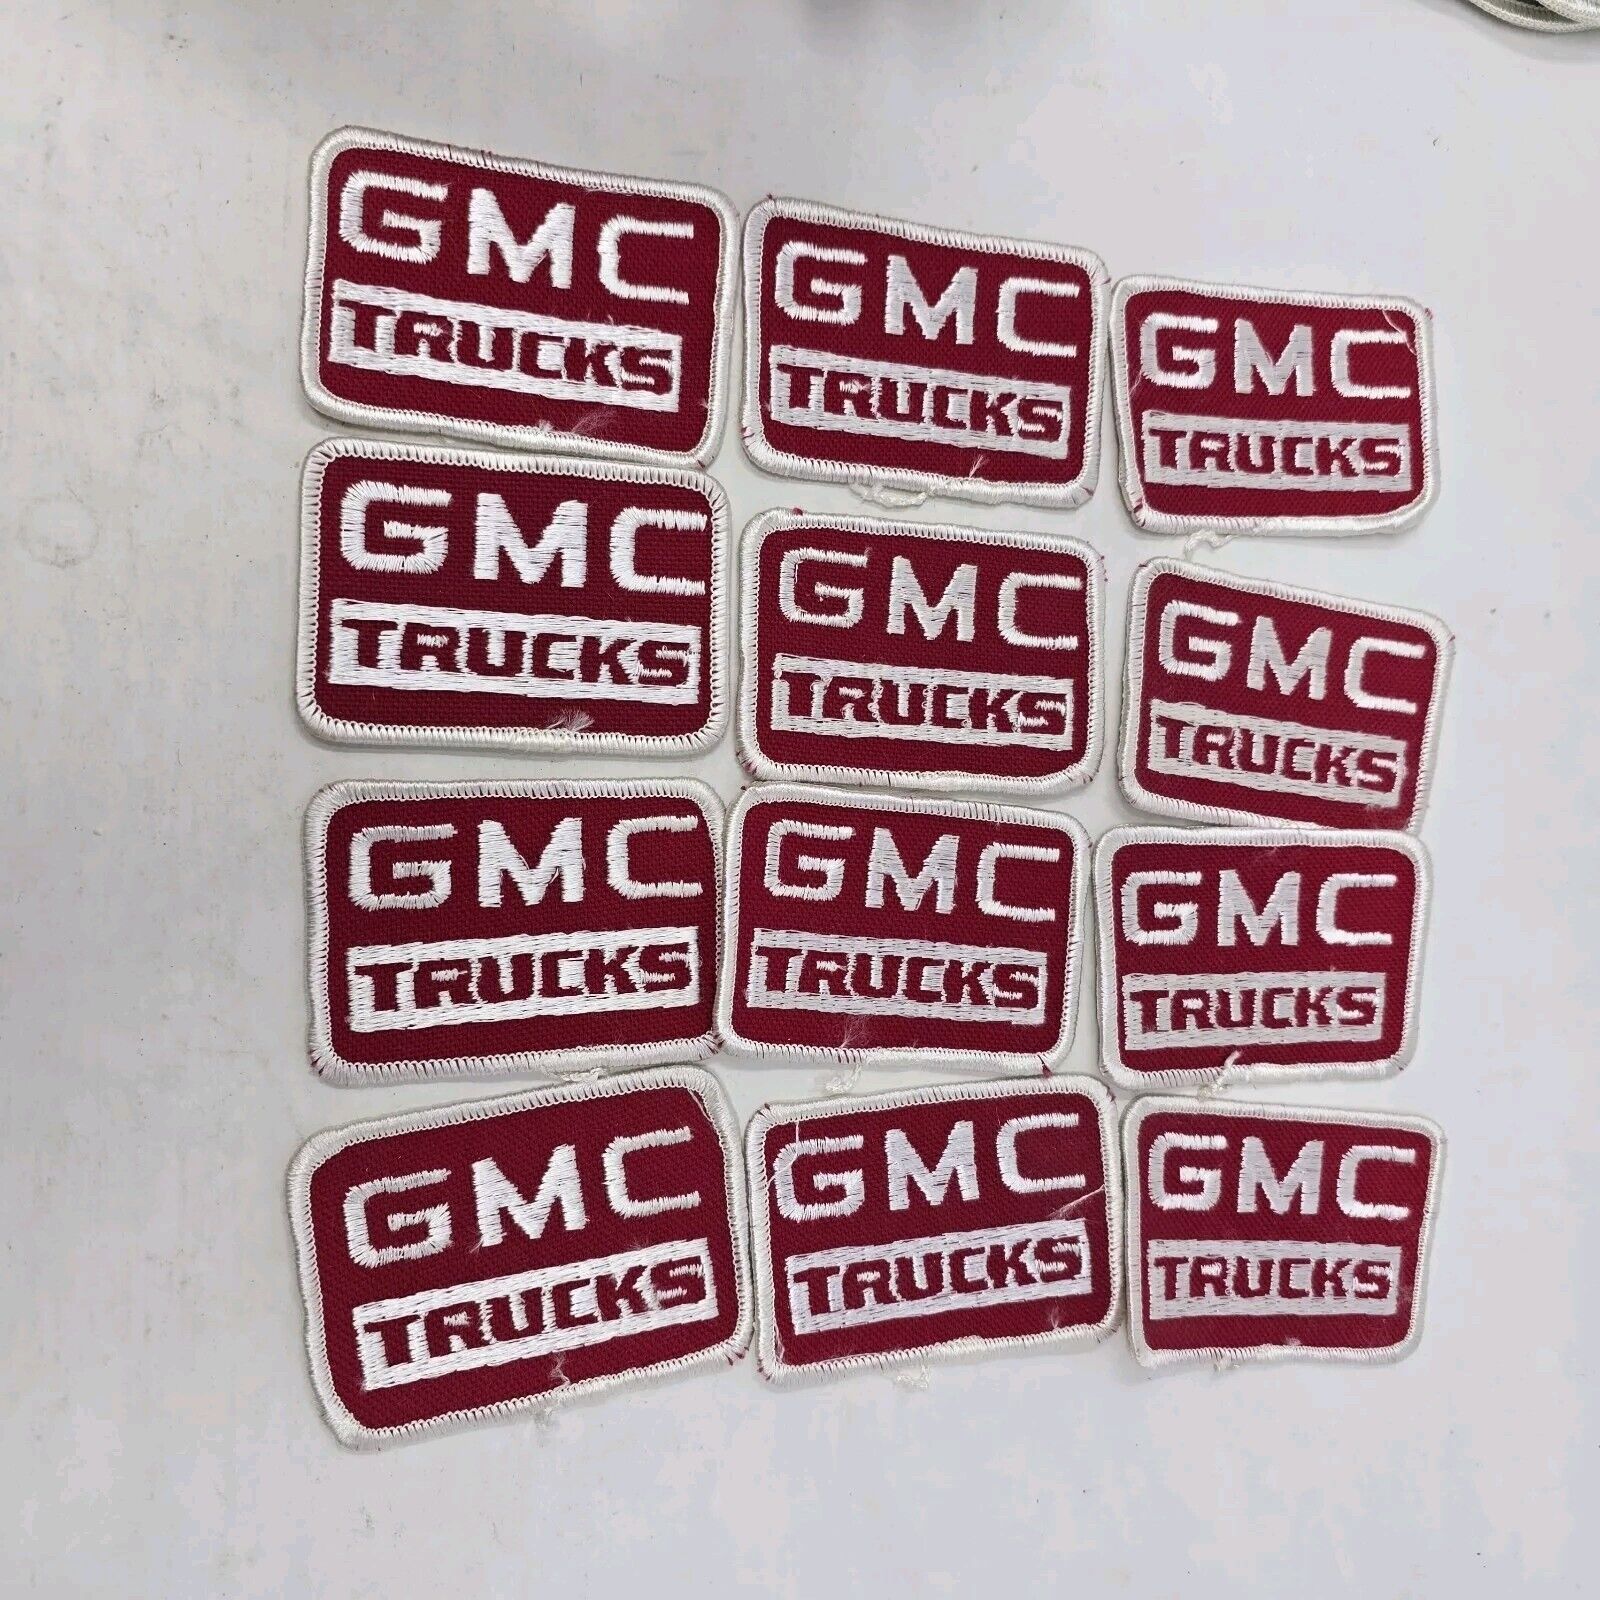 Lot Of 12 Vintage GMC Trucks Small Rectangular Sew On Patches, NOS